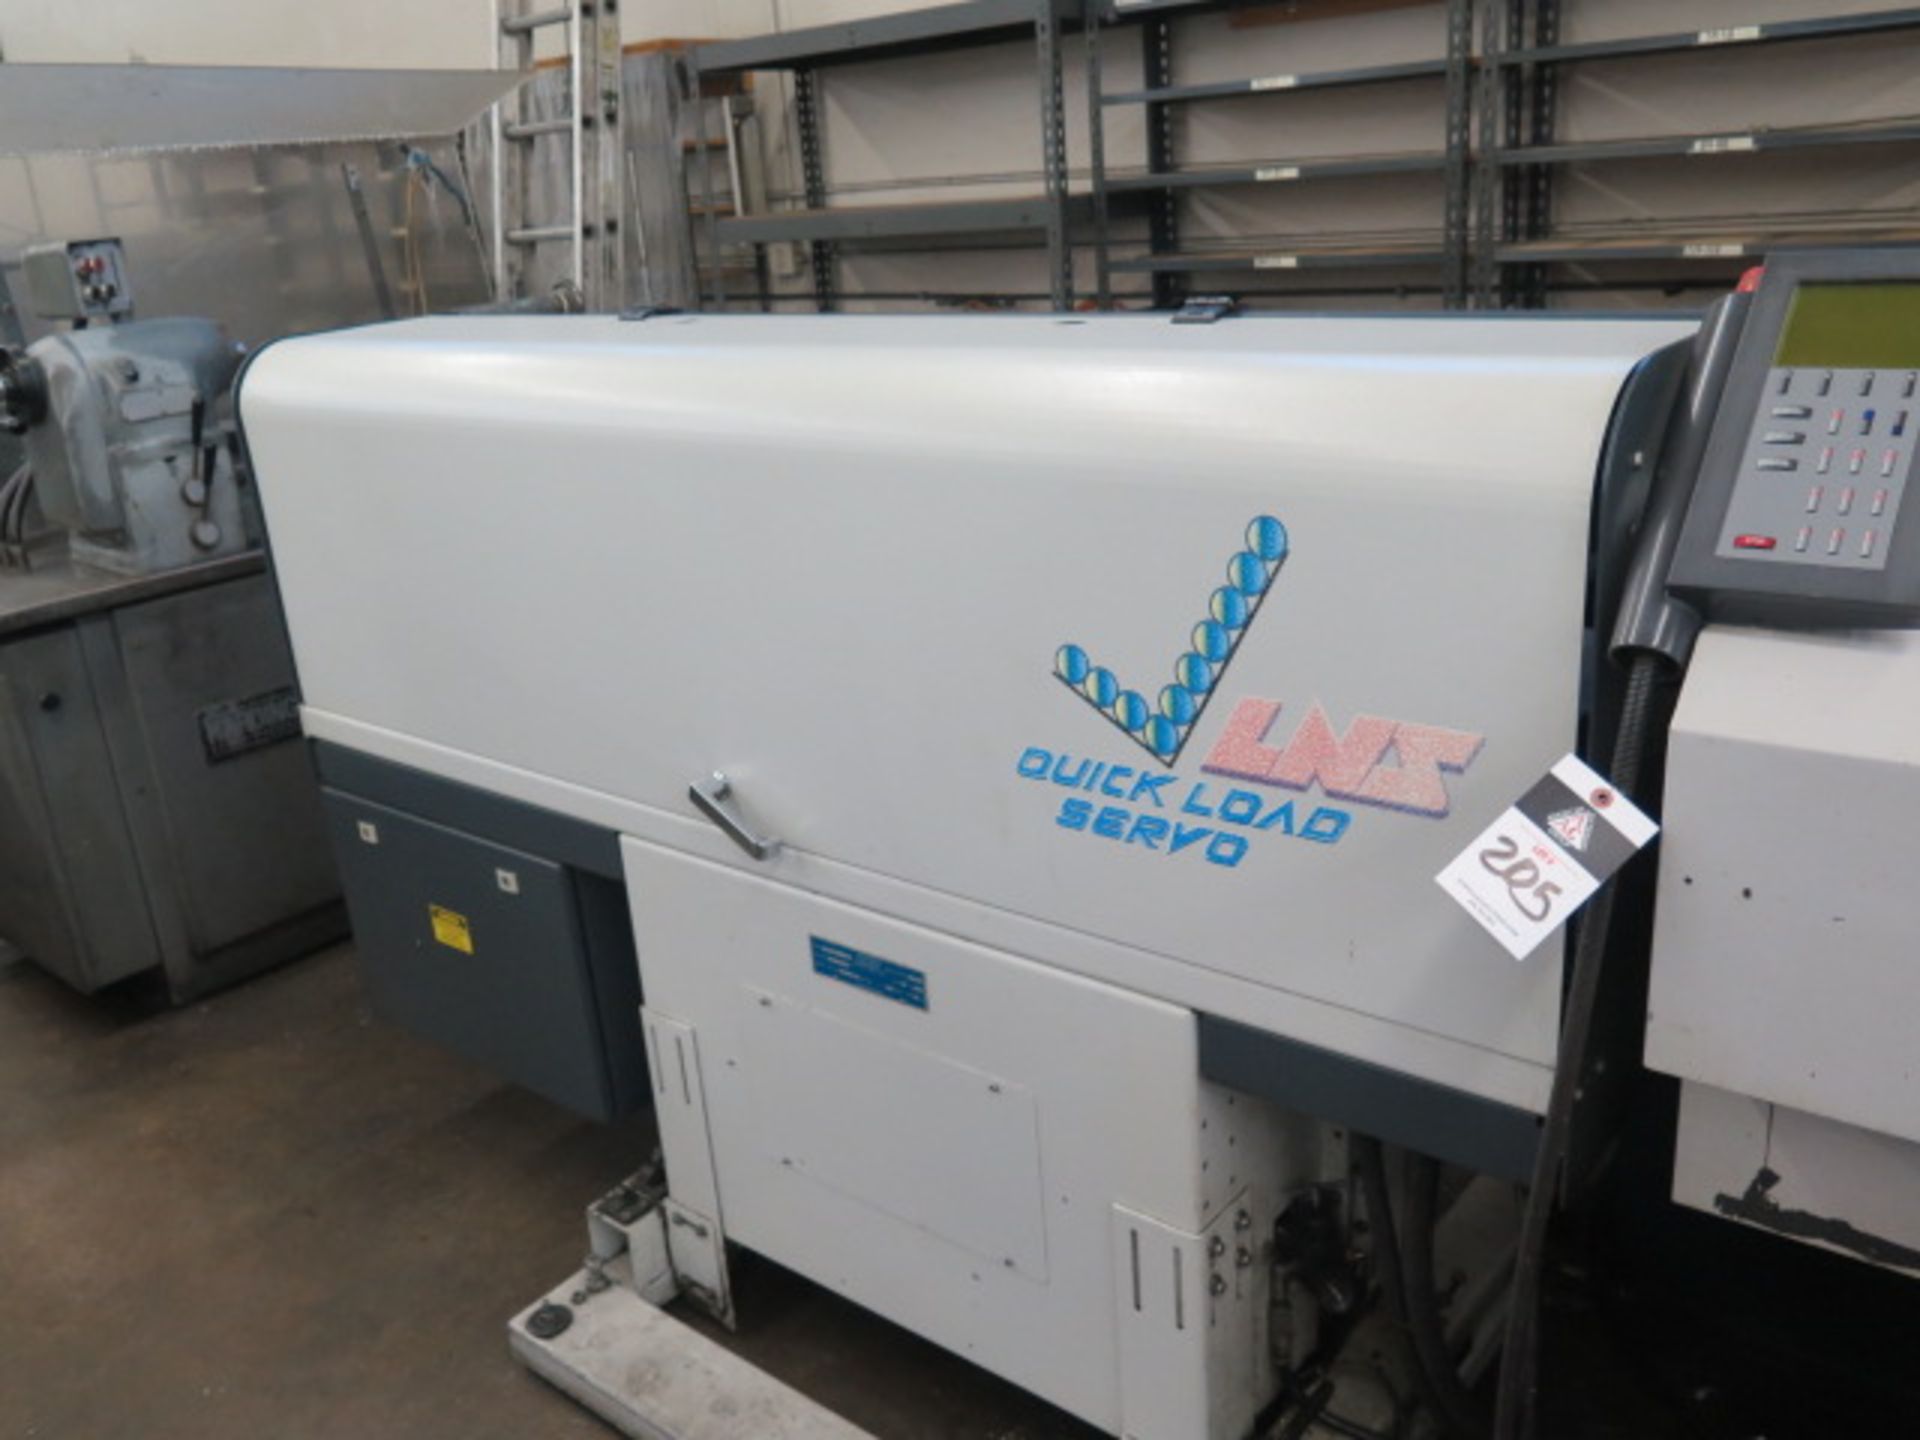 LNS Quick Load Automatic Bar Loader / Feeder (SOLD AS-IS - NO WARRANTY) - Image 2 of 10